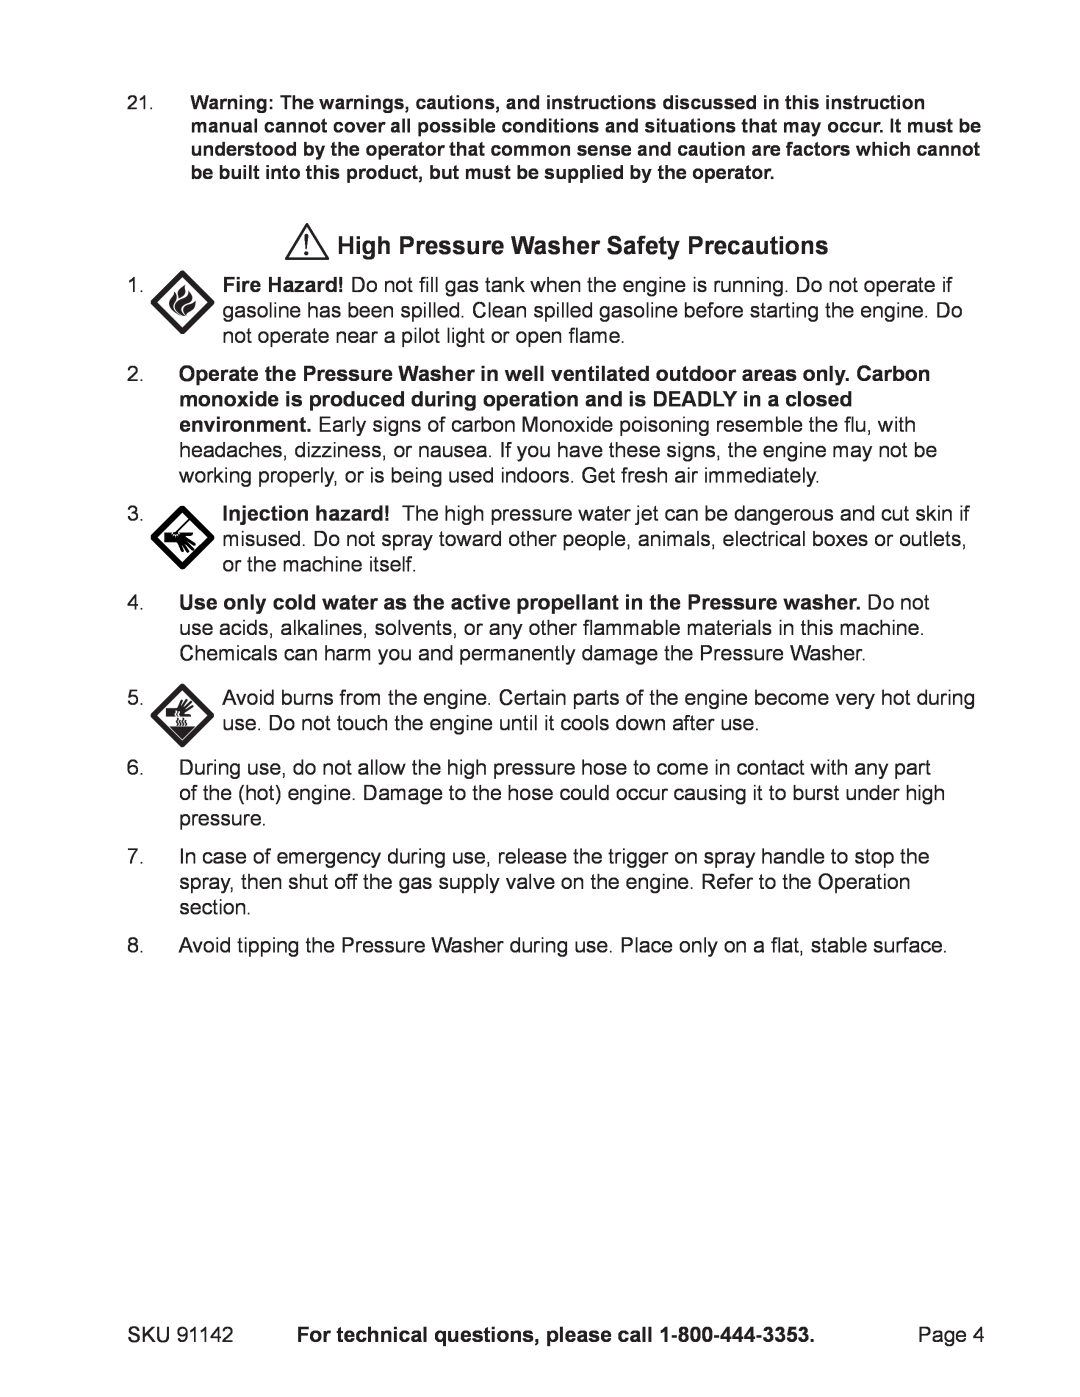 Harbor Freight Tools 91142 manual High Pressure Washer Safety Precautions, For technical questions, please call 